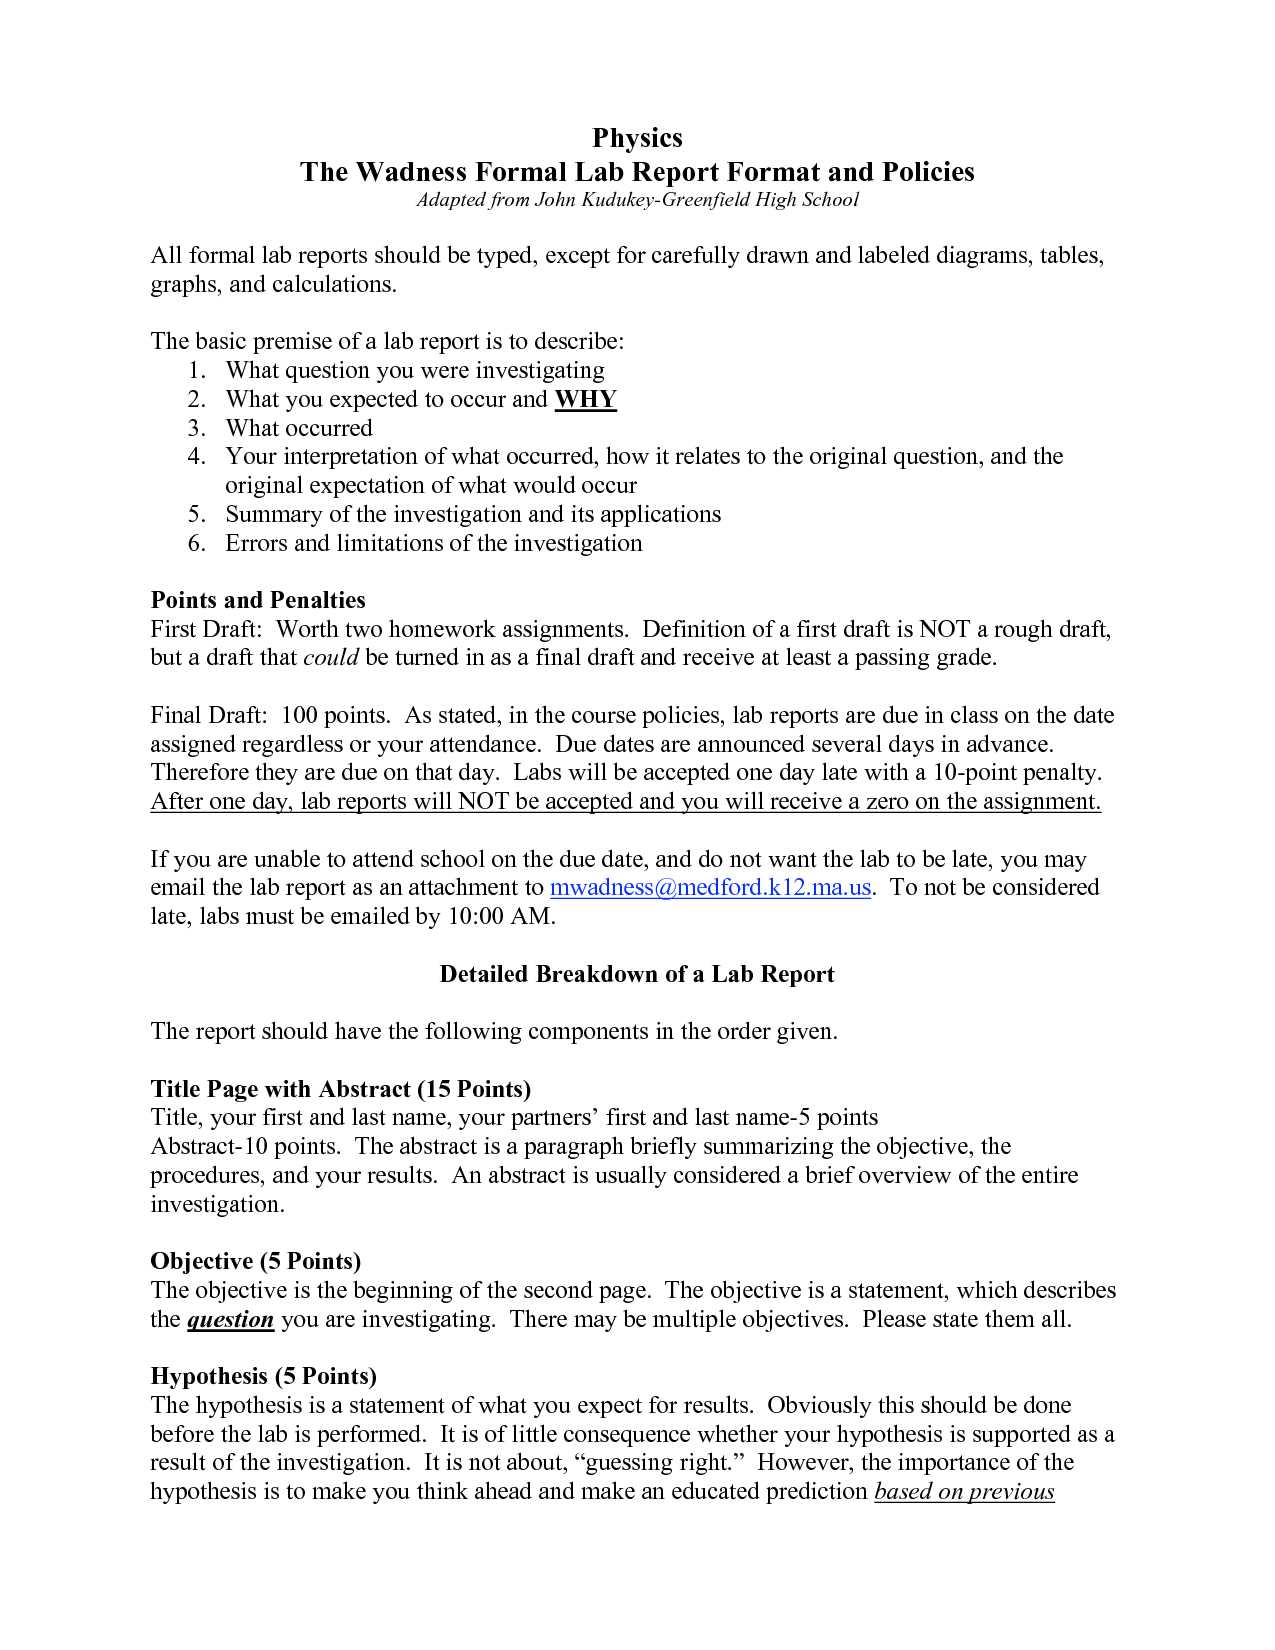 Formal Lab Report Template Physics : Biological Science In Biology Lab Report Template